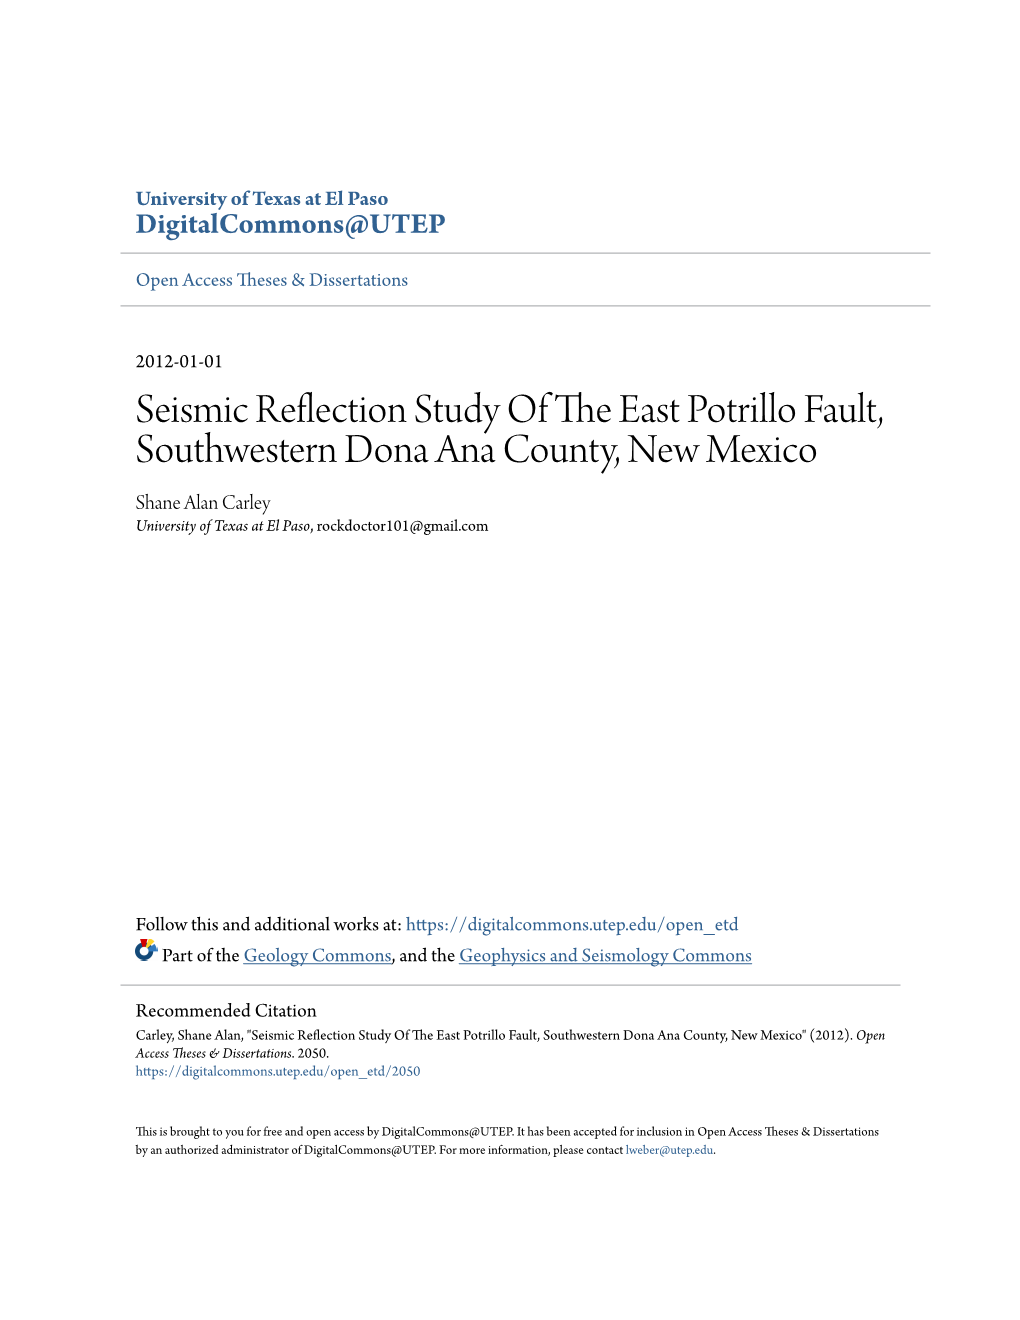 Seismic Reflection Study of the East Potrillo Fault, Southwestern Dona Ana County, New Mexico" (2012)